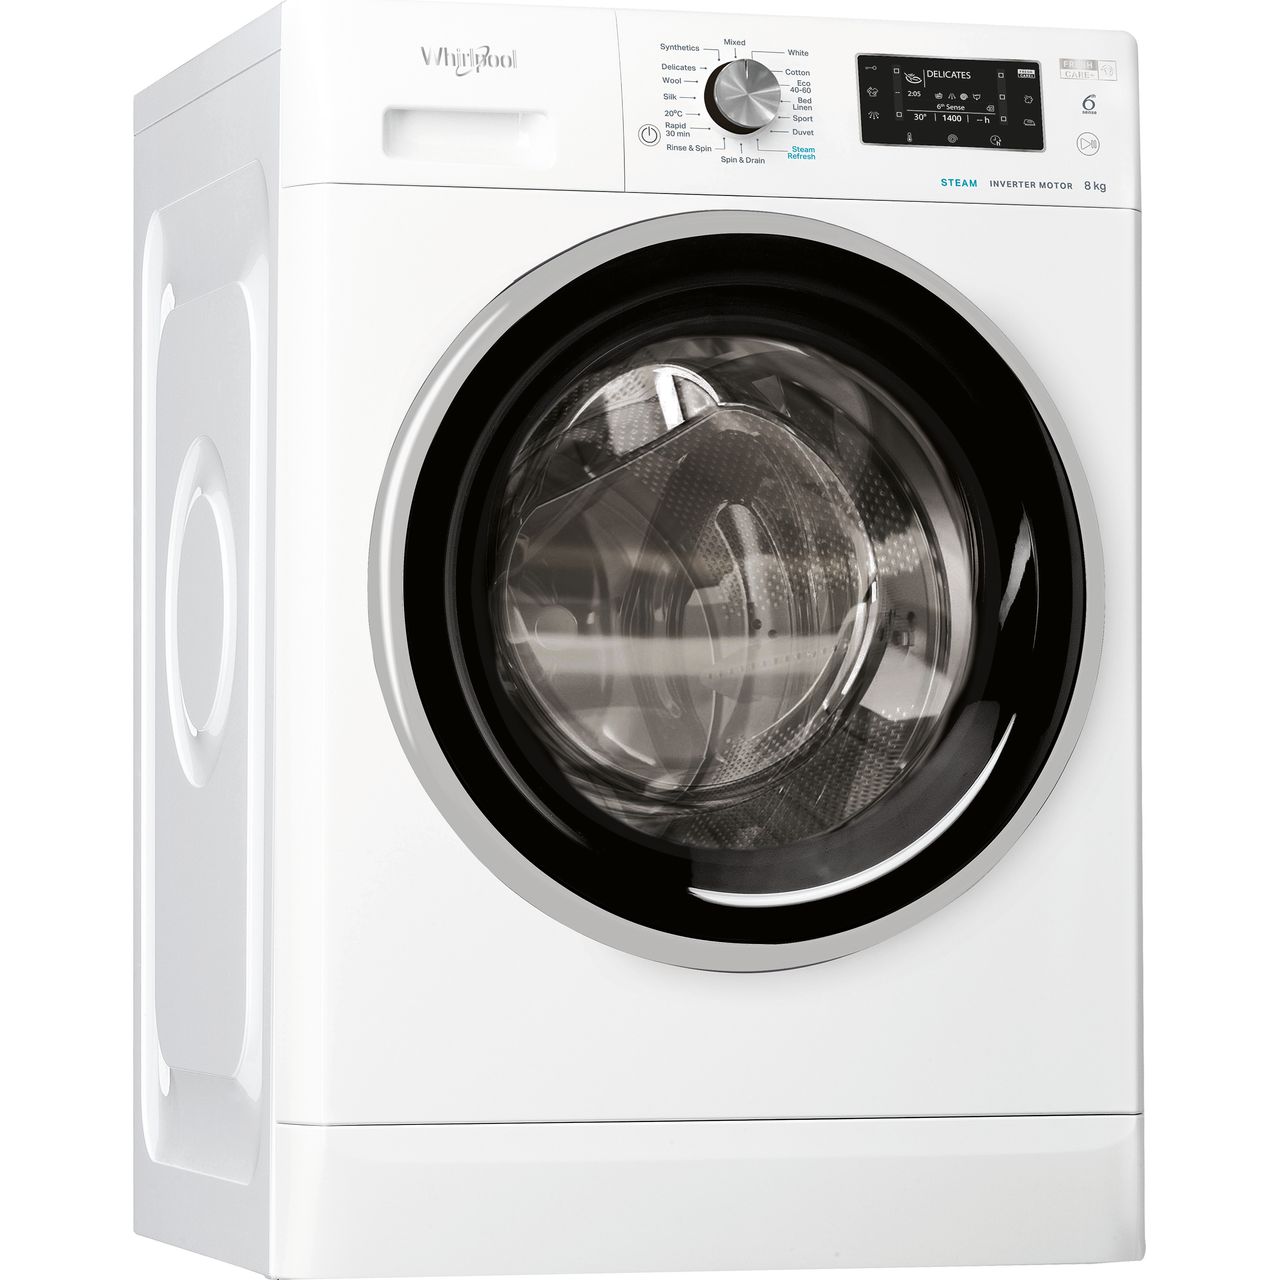 Whirlpool FFD8448BSVUK 8Kg Washing Machine with 1400 rpm Review